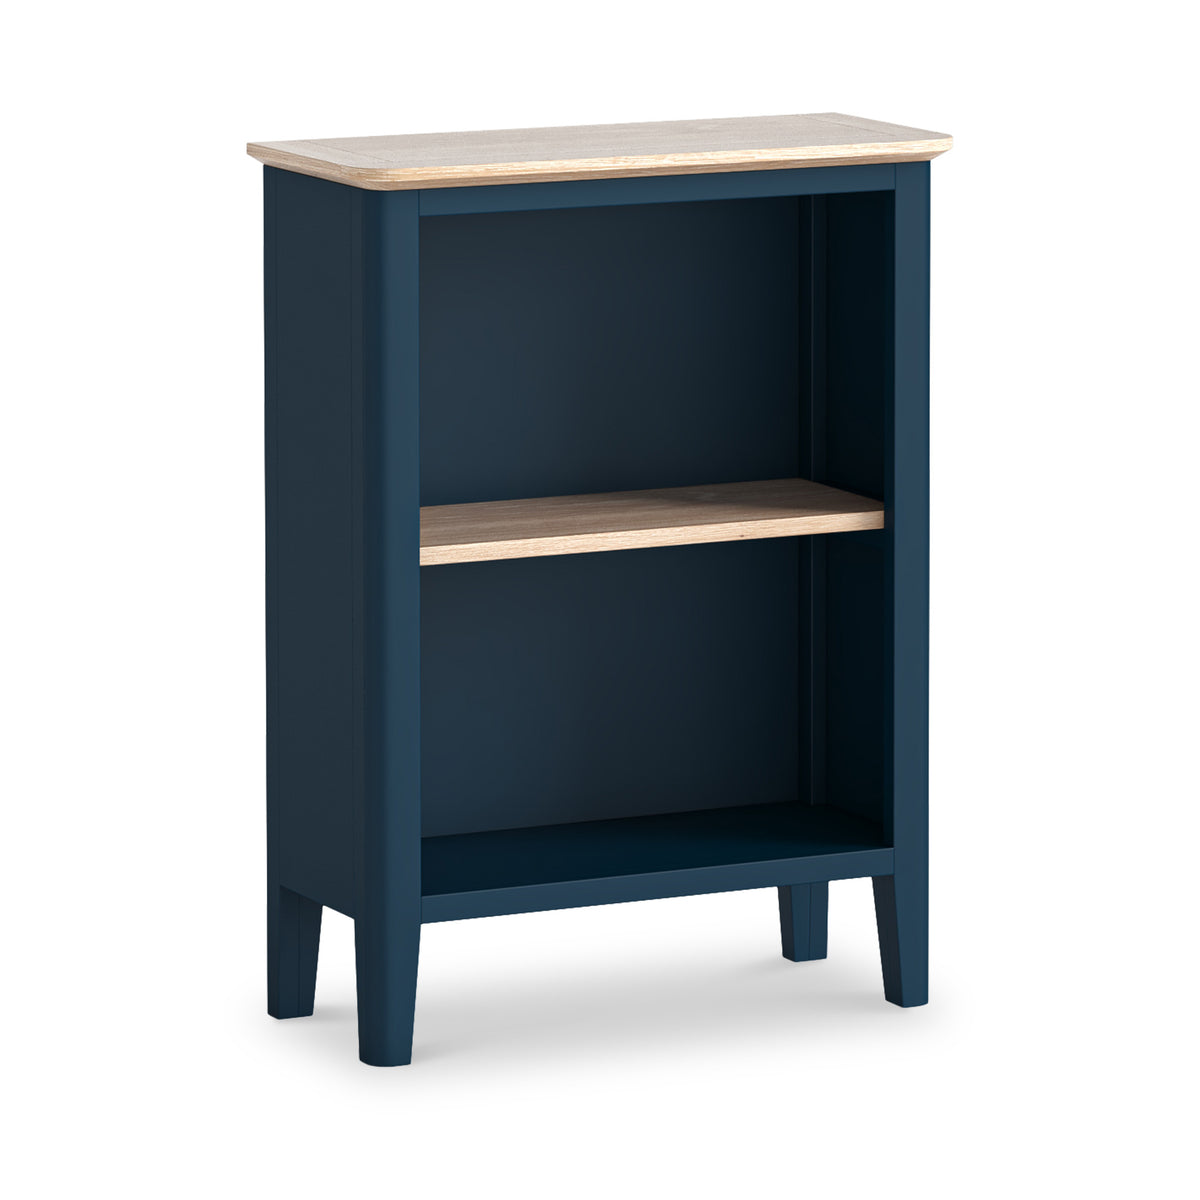 Penrose Navy Blue Small Bookcase from Roseland Furniture